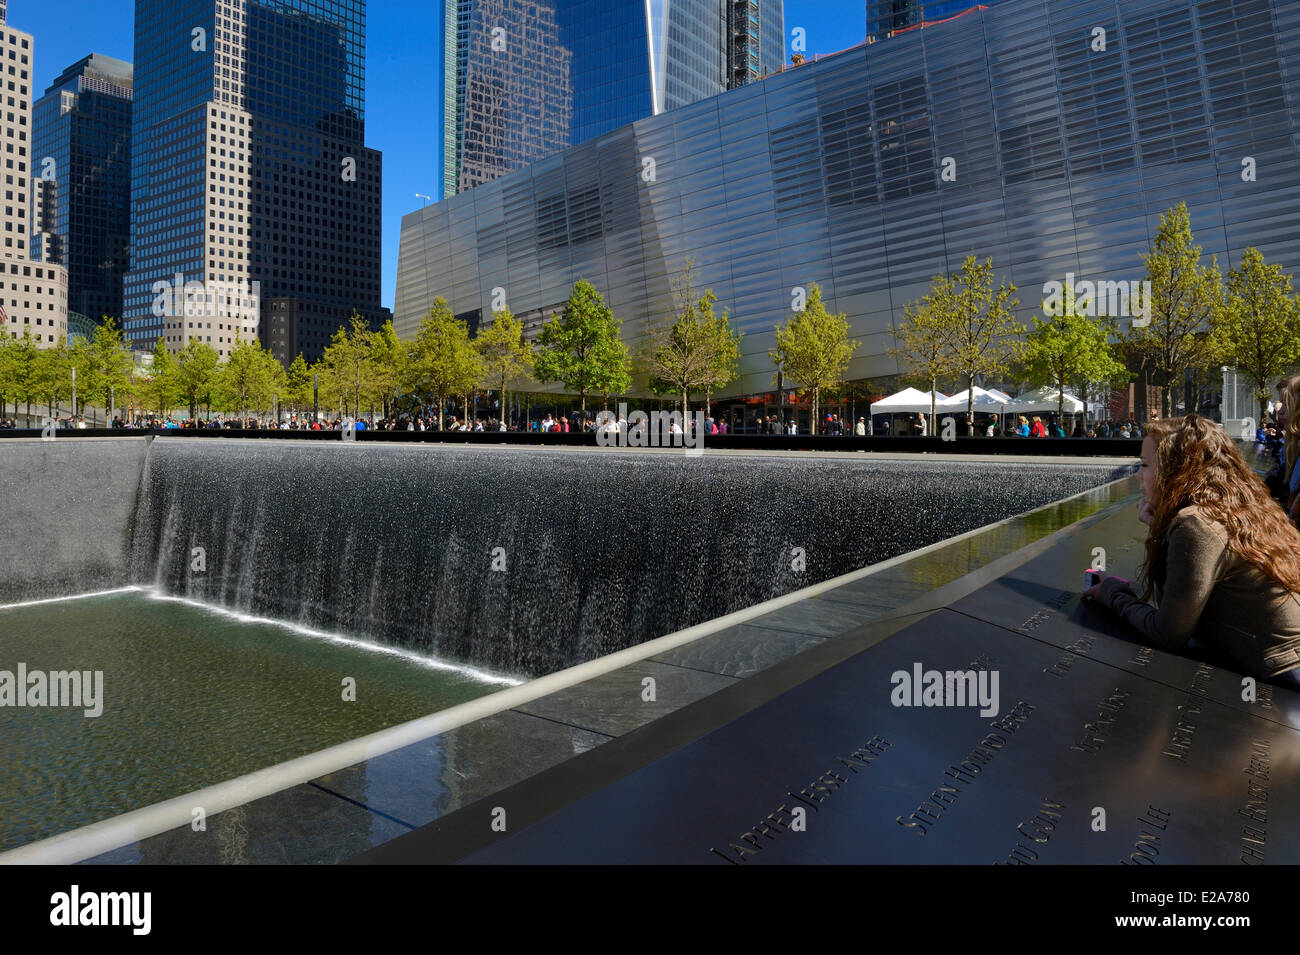 United States, New York, Manhattan, 9/11 Memorial designed by Israeli architect Michael Arad involving a forest of trees around Stock Photo